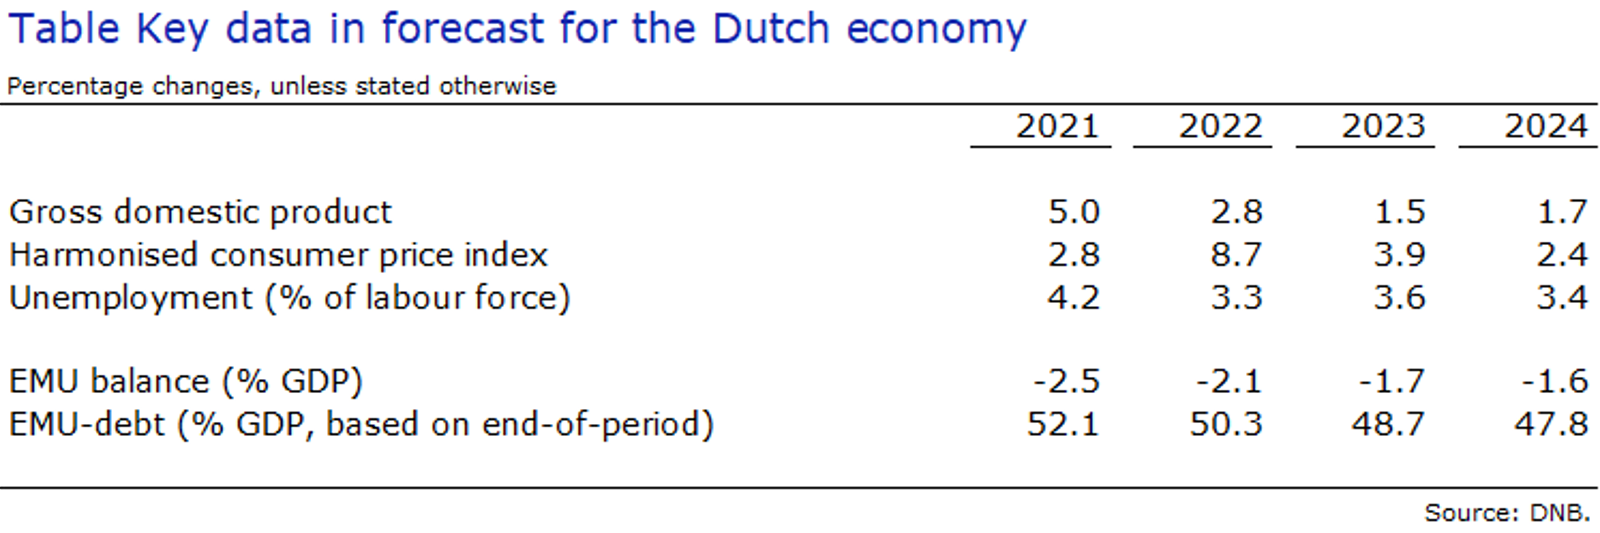 Table Key data in forecast for the Dutch economy